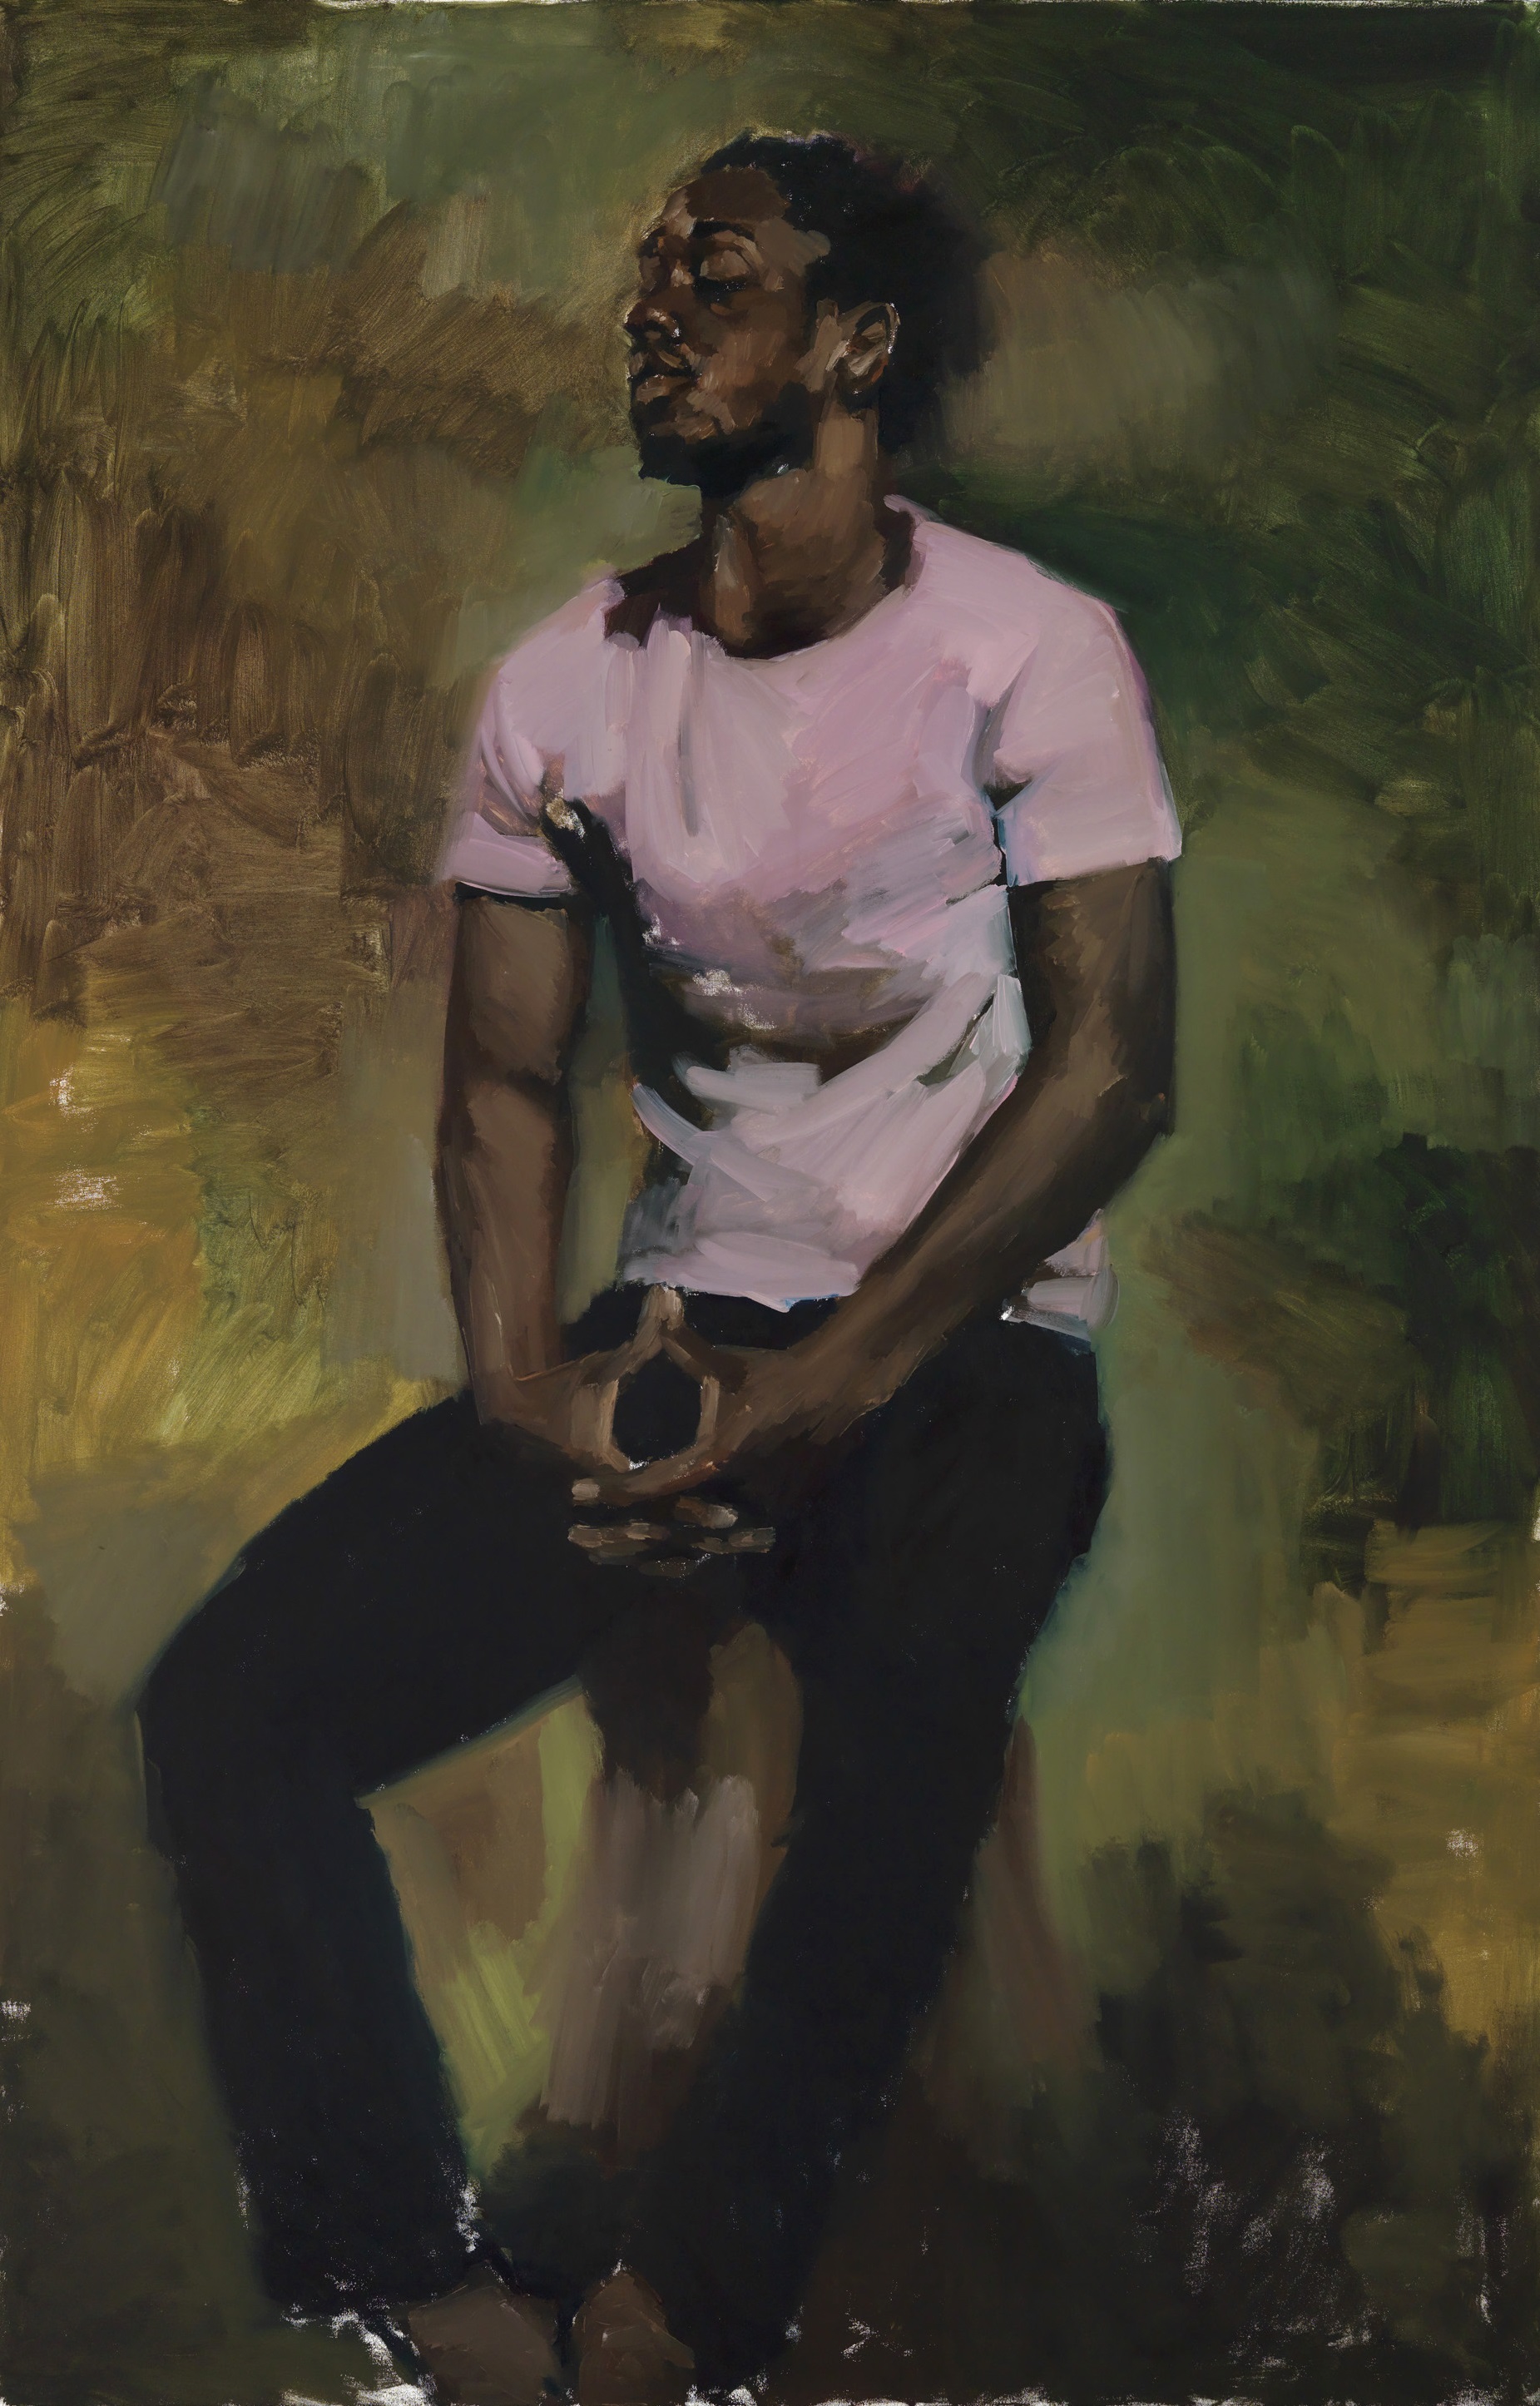 Lynette Yiadom-Boakye | Coterie Of Questions 2015 | Oil paint on canvas | 2000 x 1300 x 37 mm | Private collection. Courtesy Corvi-Mora, London and Jack Shainman Gallery, New York © Lynette Yiadom-Boakye 